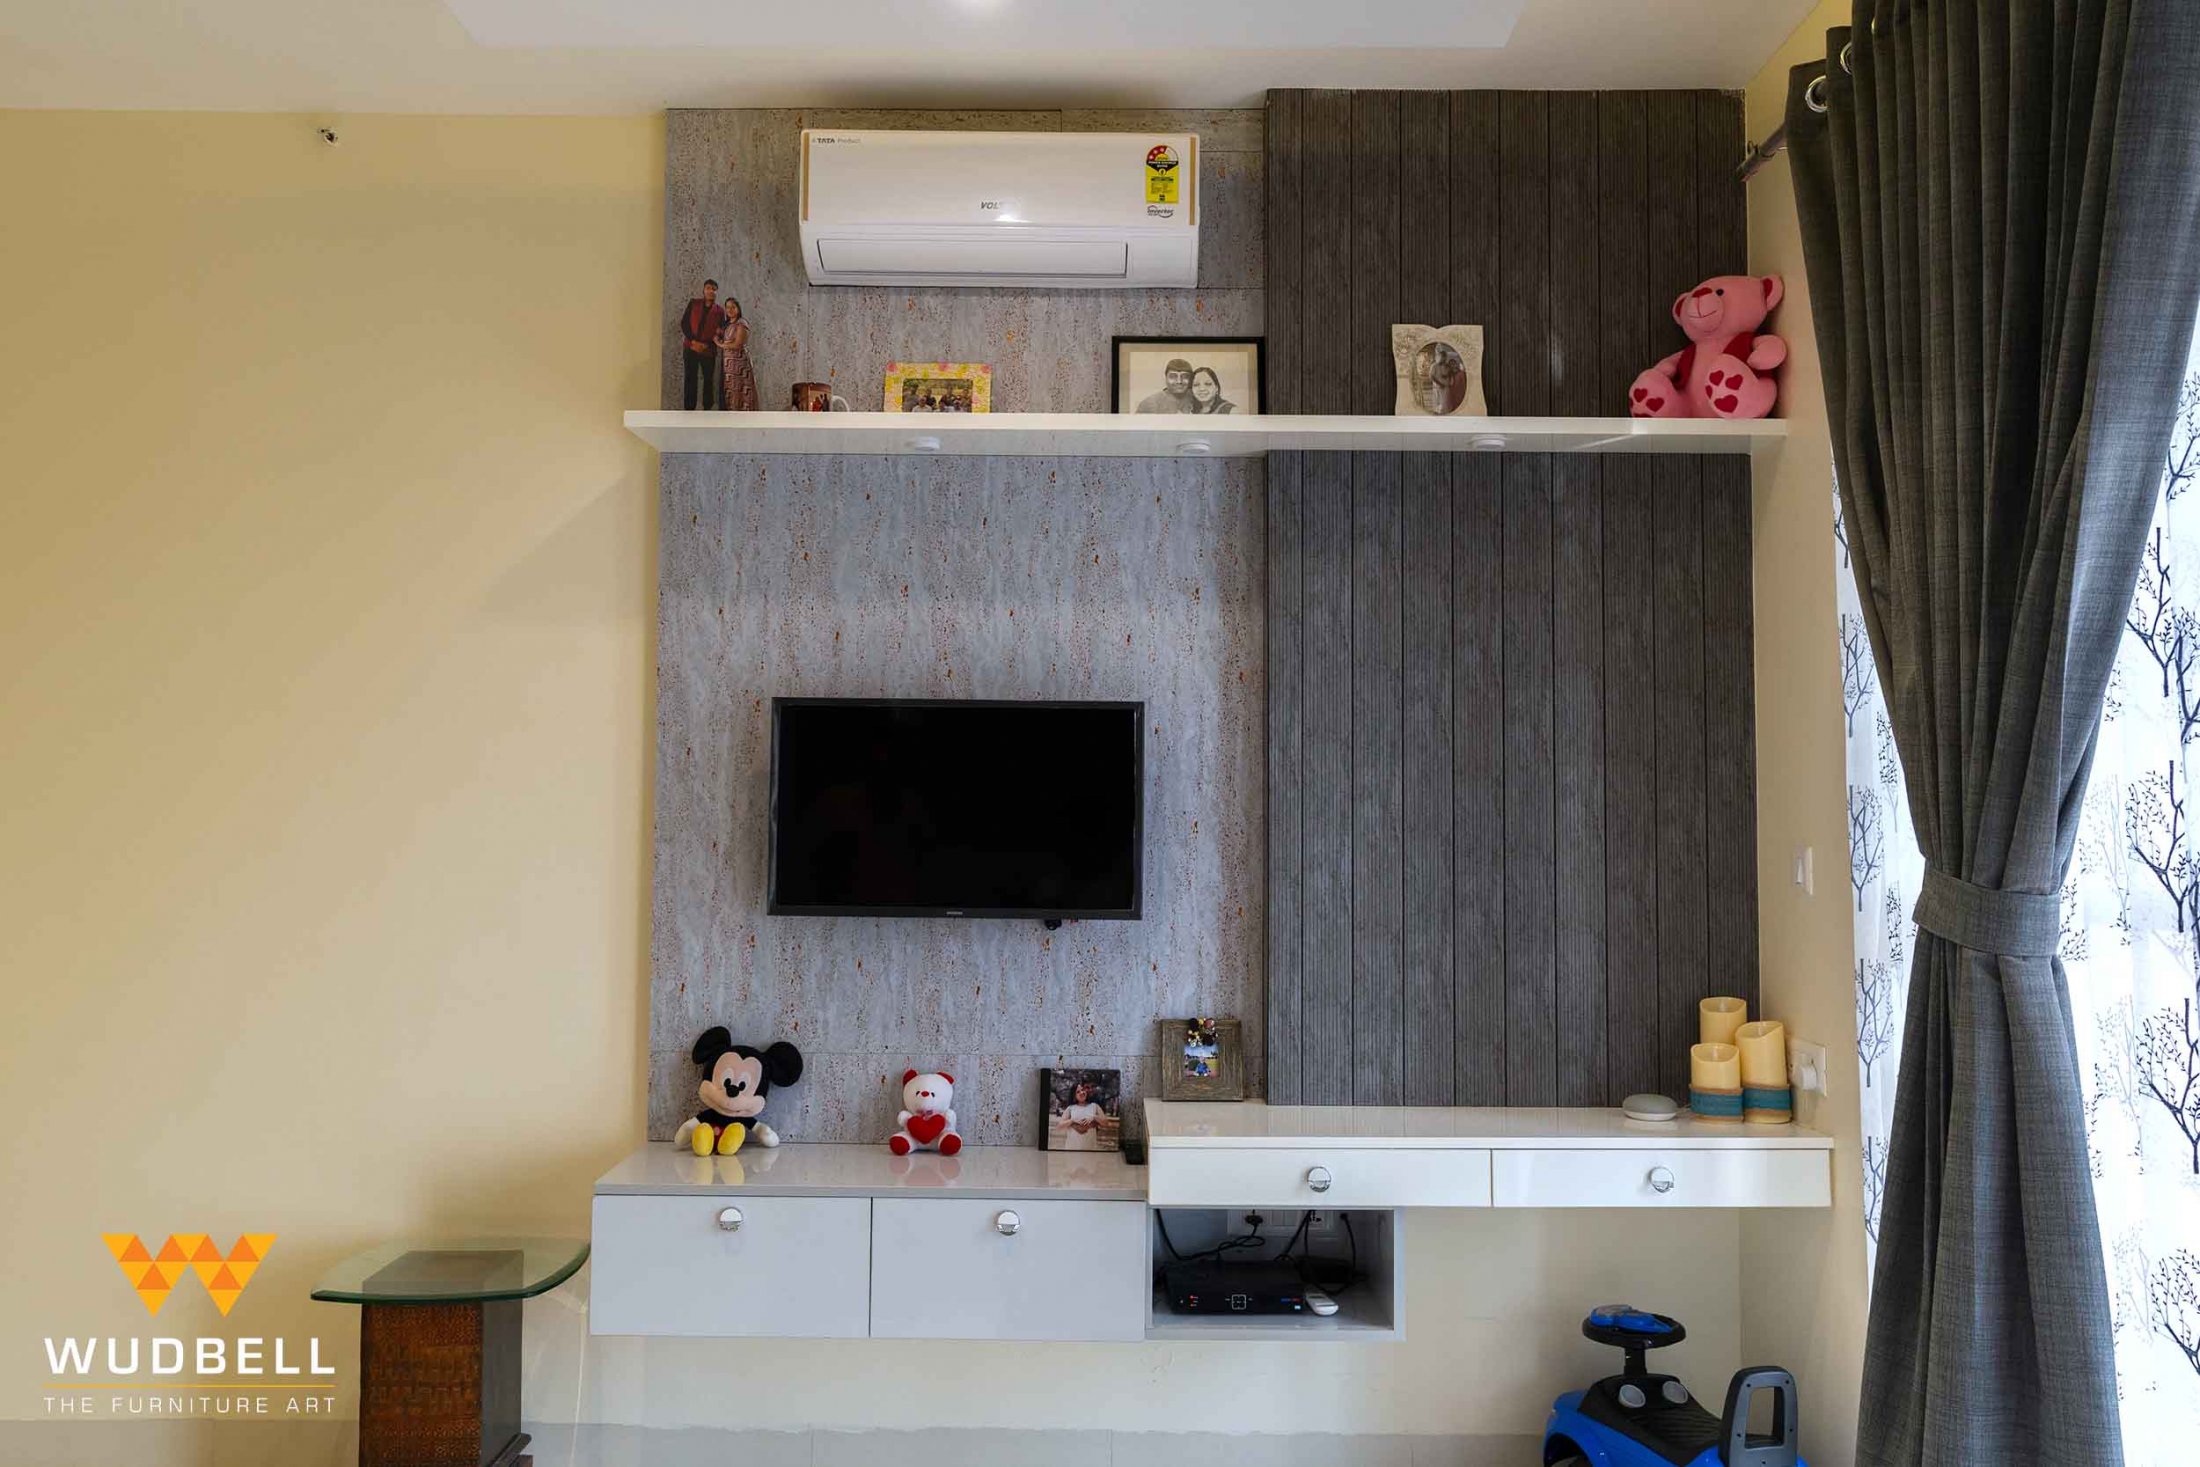 The solid wall panelling of the entertainment unit